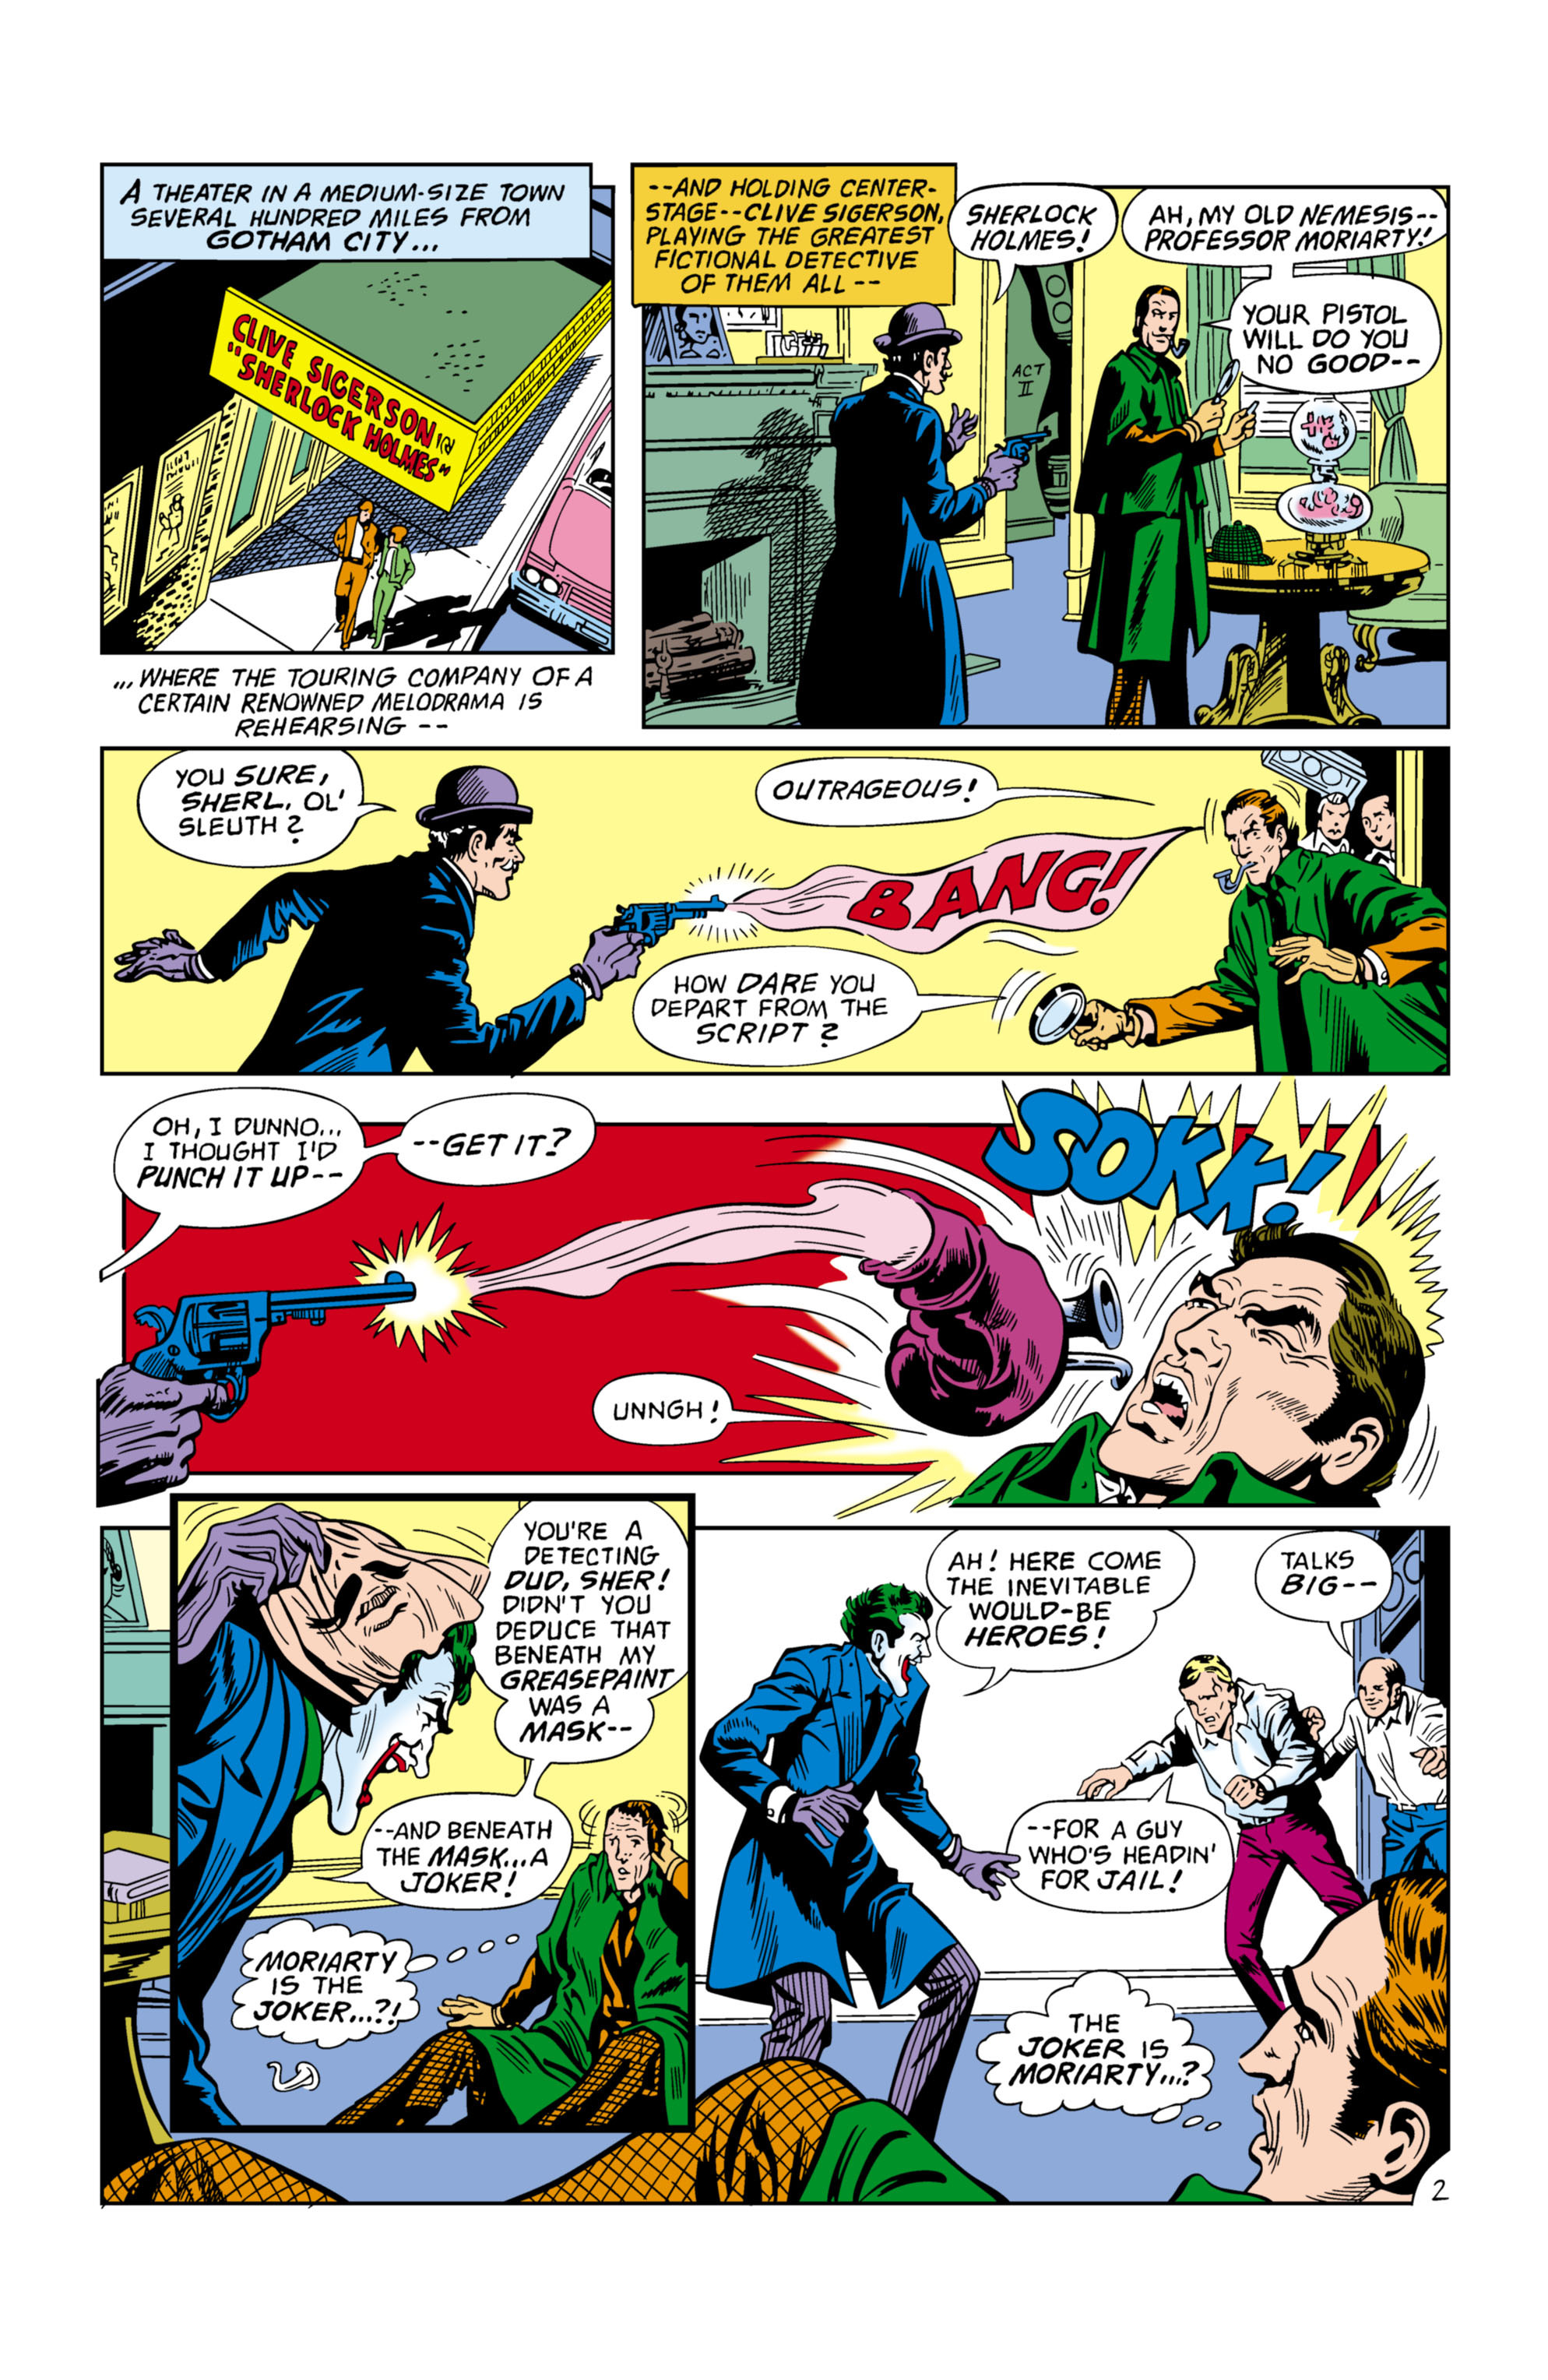 The Joker (1975-1976 + 2019): Chapter 6 - Page 3